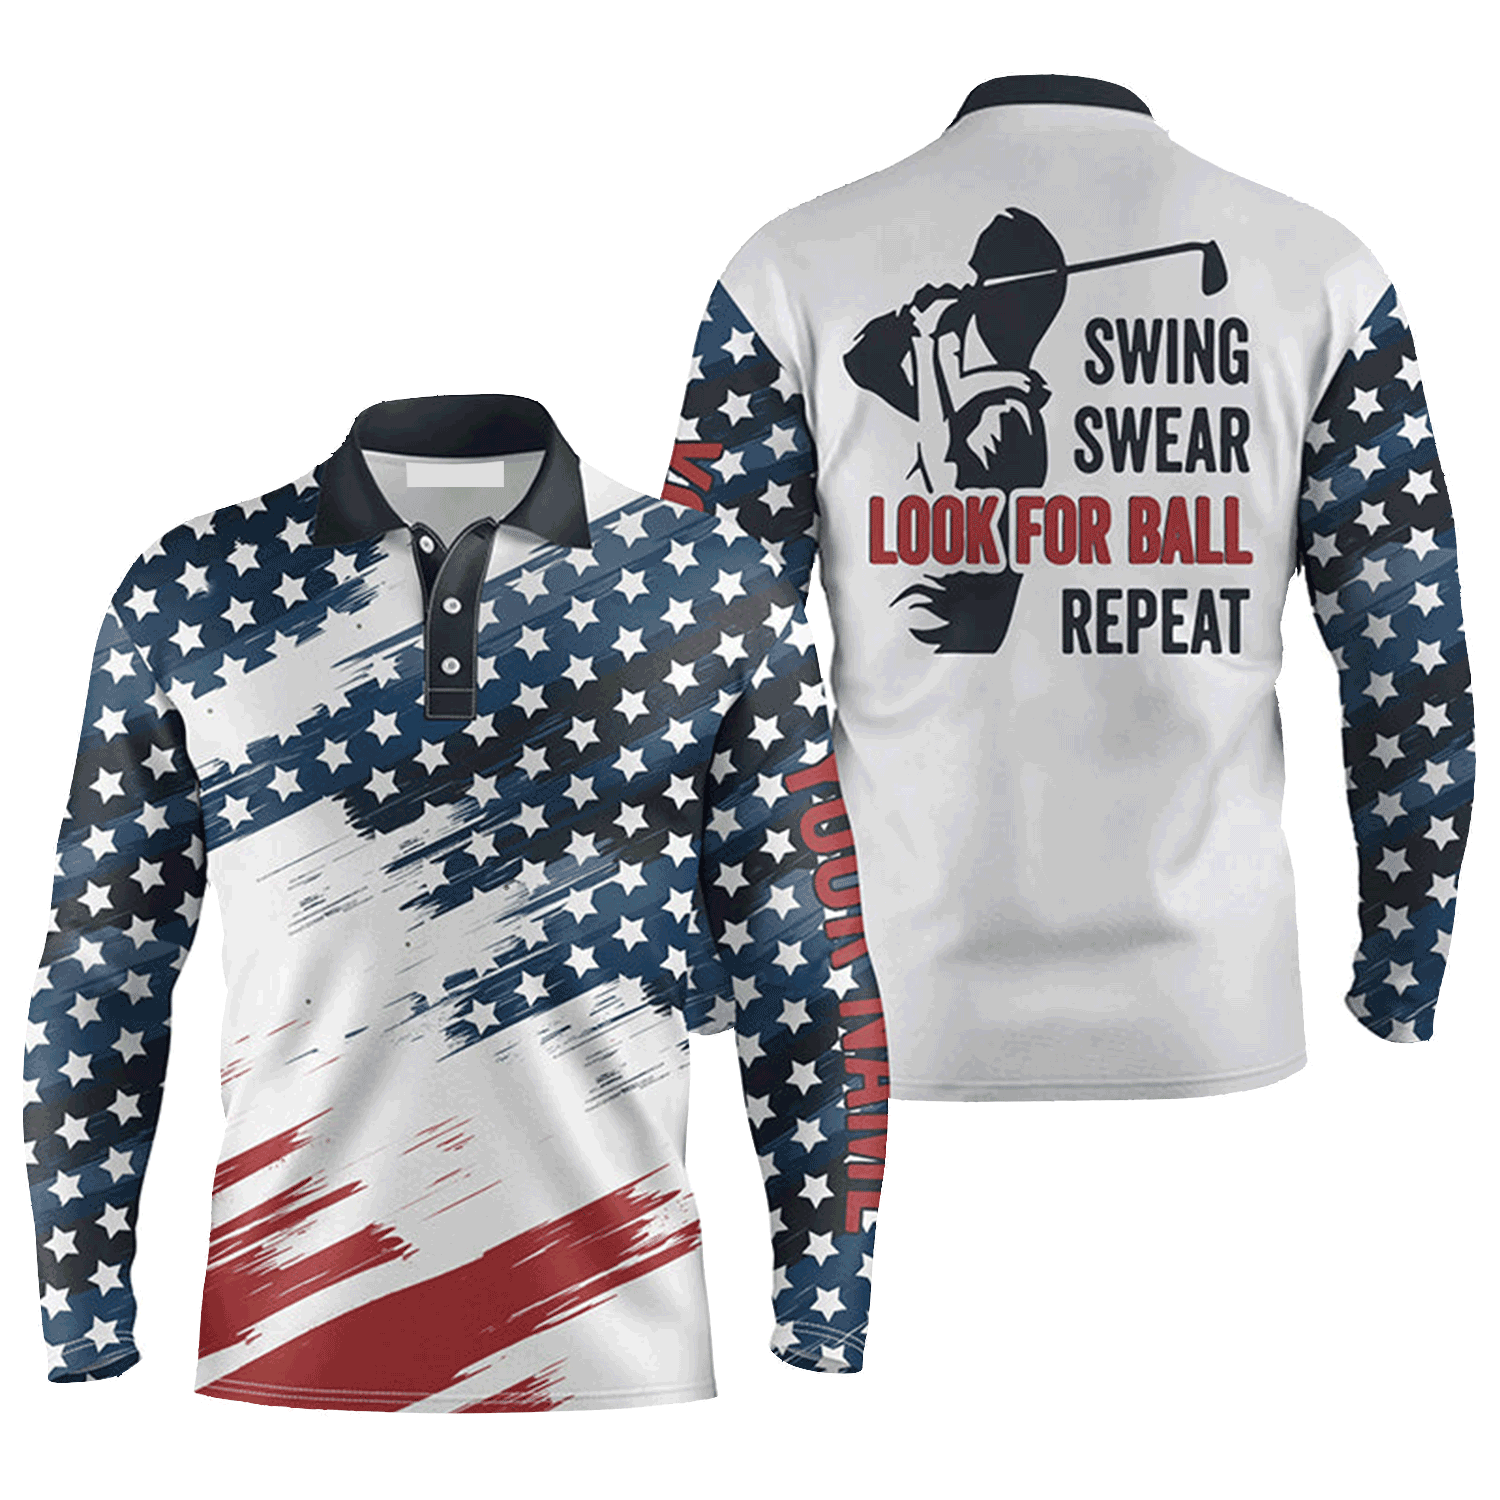 Personalized Name American Flag Golf Long Sleeve Polo Shirt/ Swing Swear Look For Ball Repeat 3D Shirt/ Gift For Men